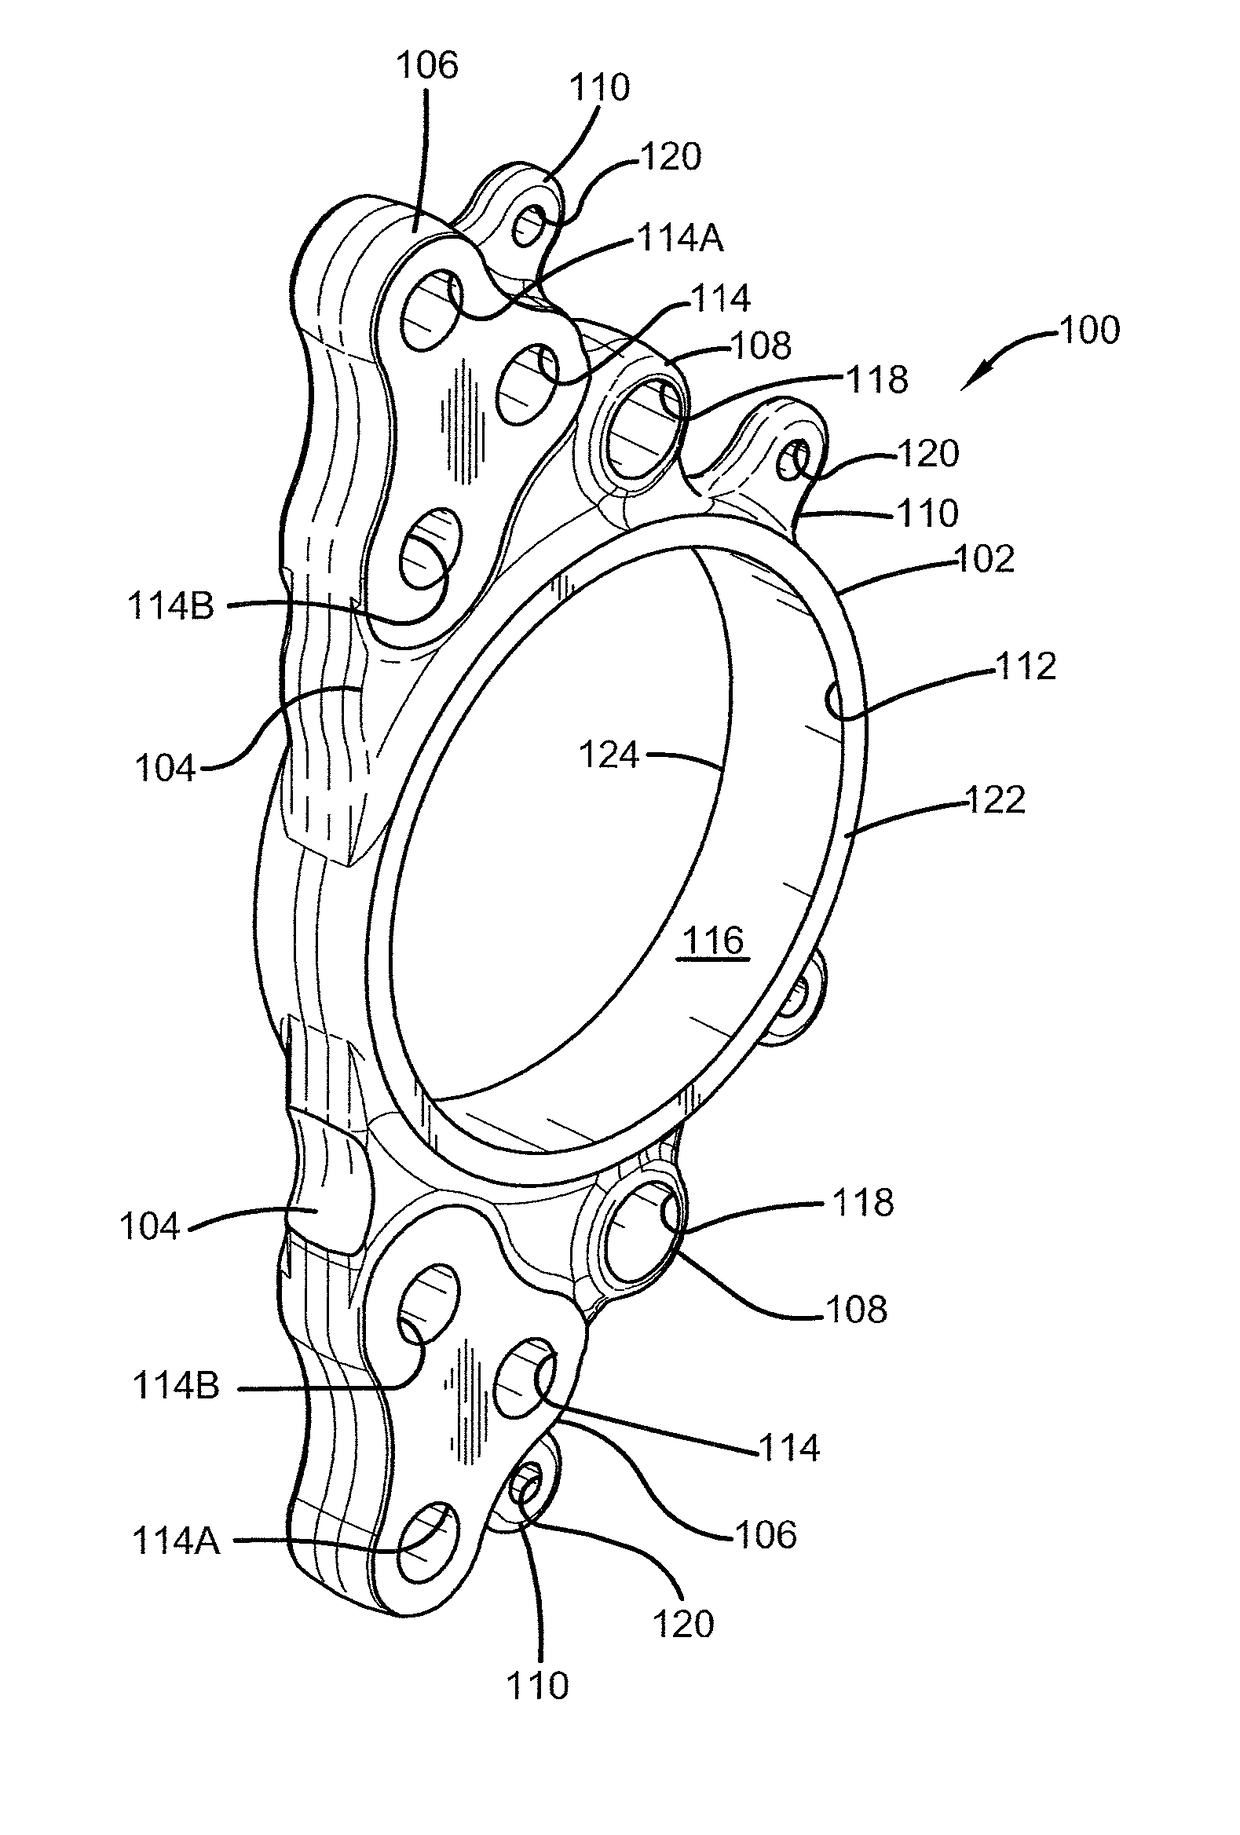 Torque plate for heavy-duty vehicles